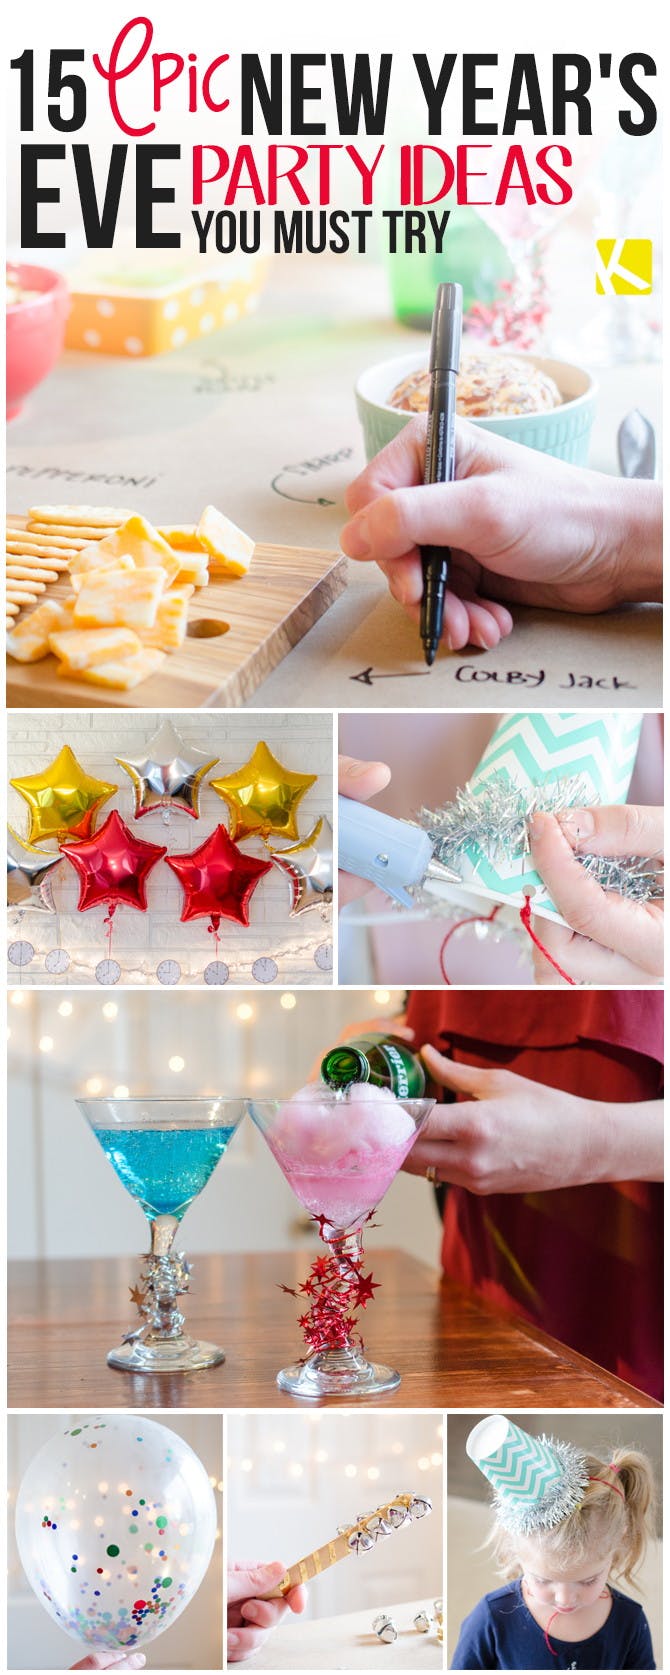 15 Epic New Year&#039;s Eve Party Ideas You Must Try - The Krazy Coupon Lady